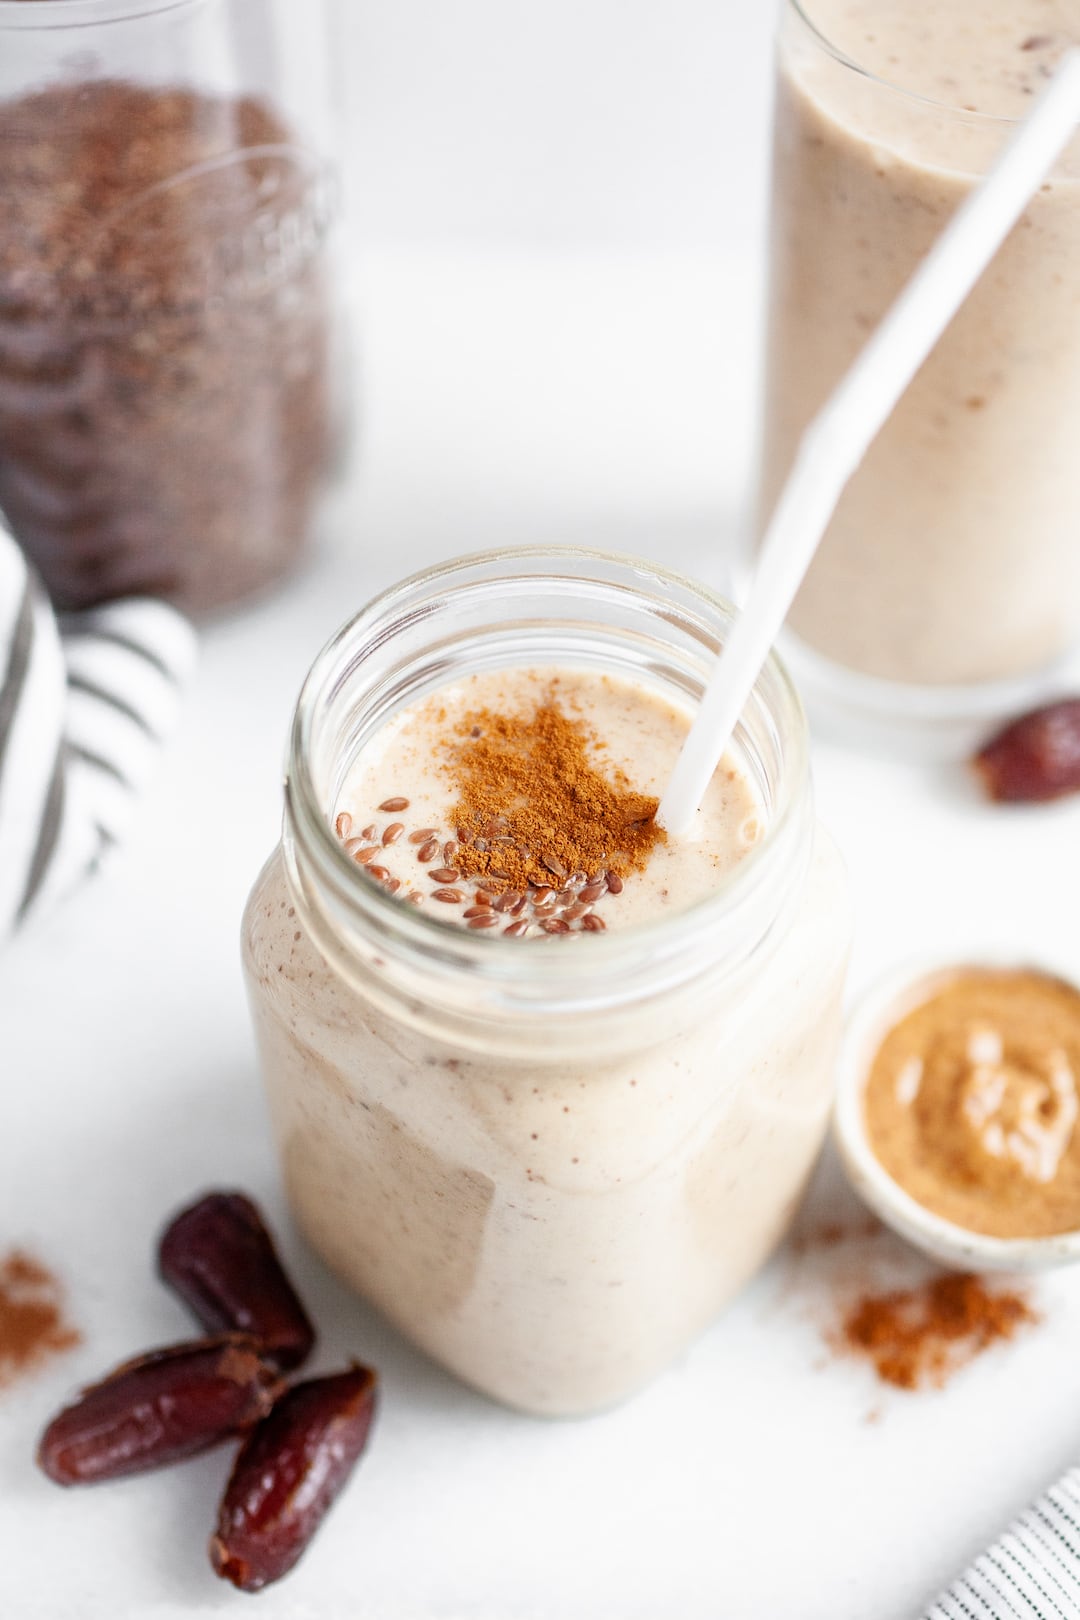 Banana Almond Butter Date Smoothie Recipe with cinnamon and flax